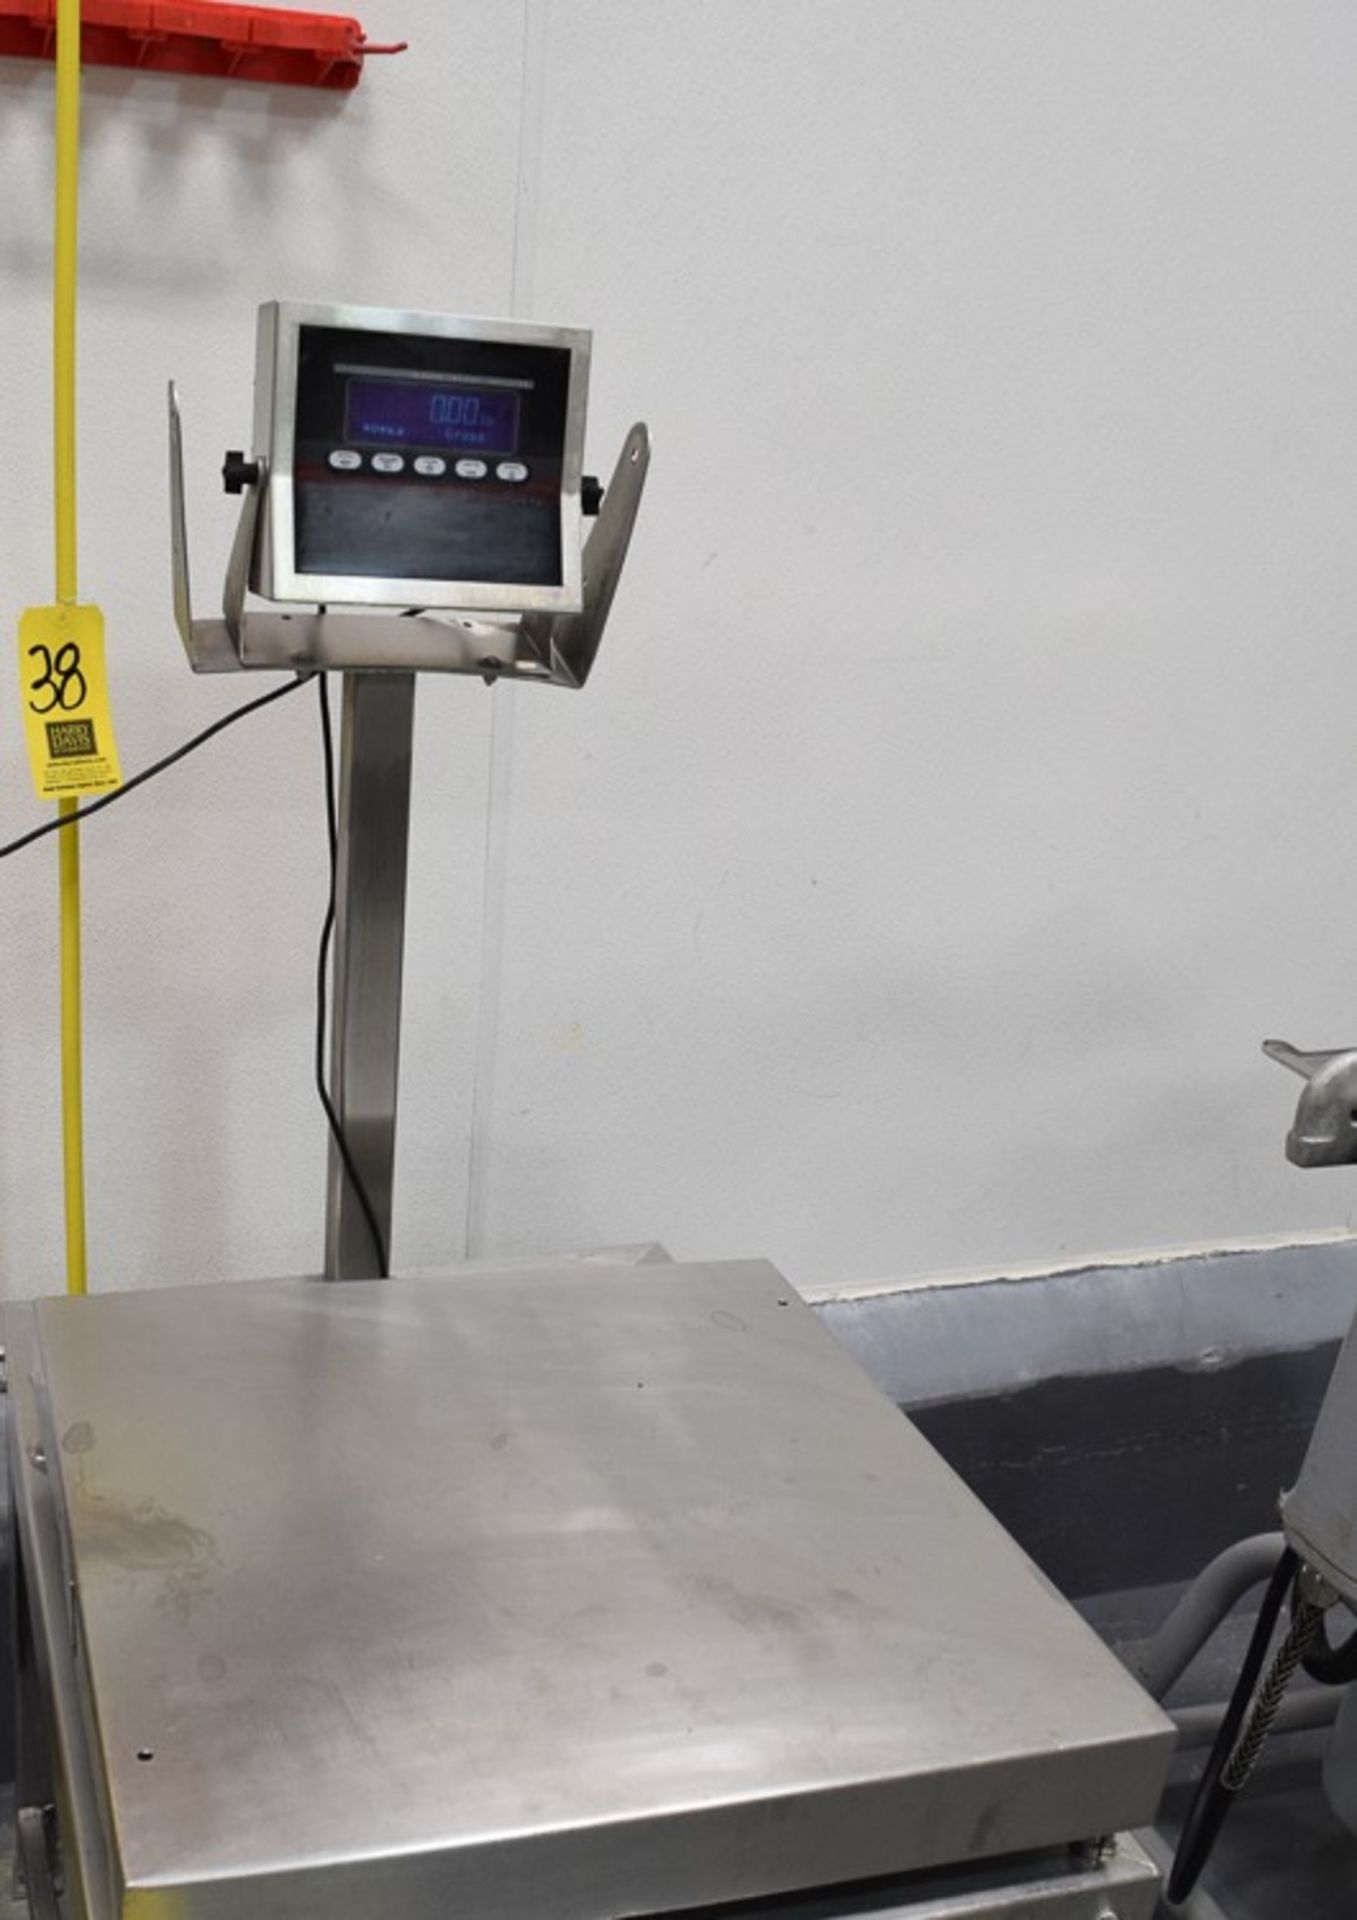 Automated 200 Pound Capacity S/S Digital Scale, Rigging Fee: Please Contact US Rigging 920-655-2767 - Image 2 of 2